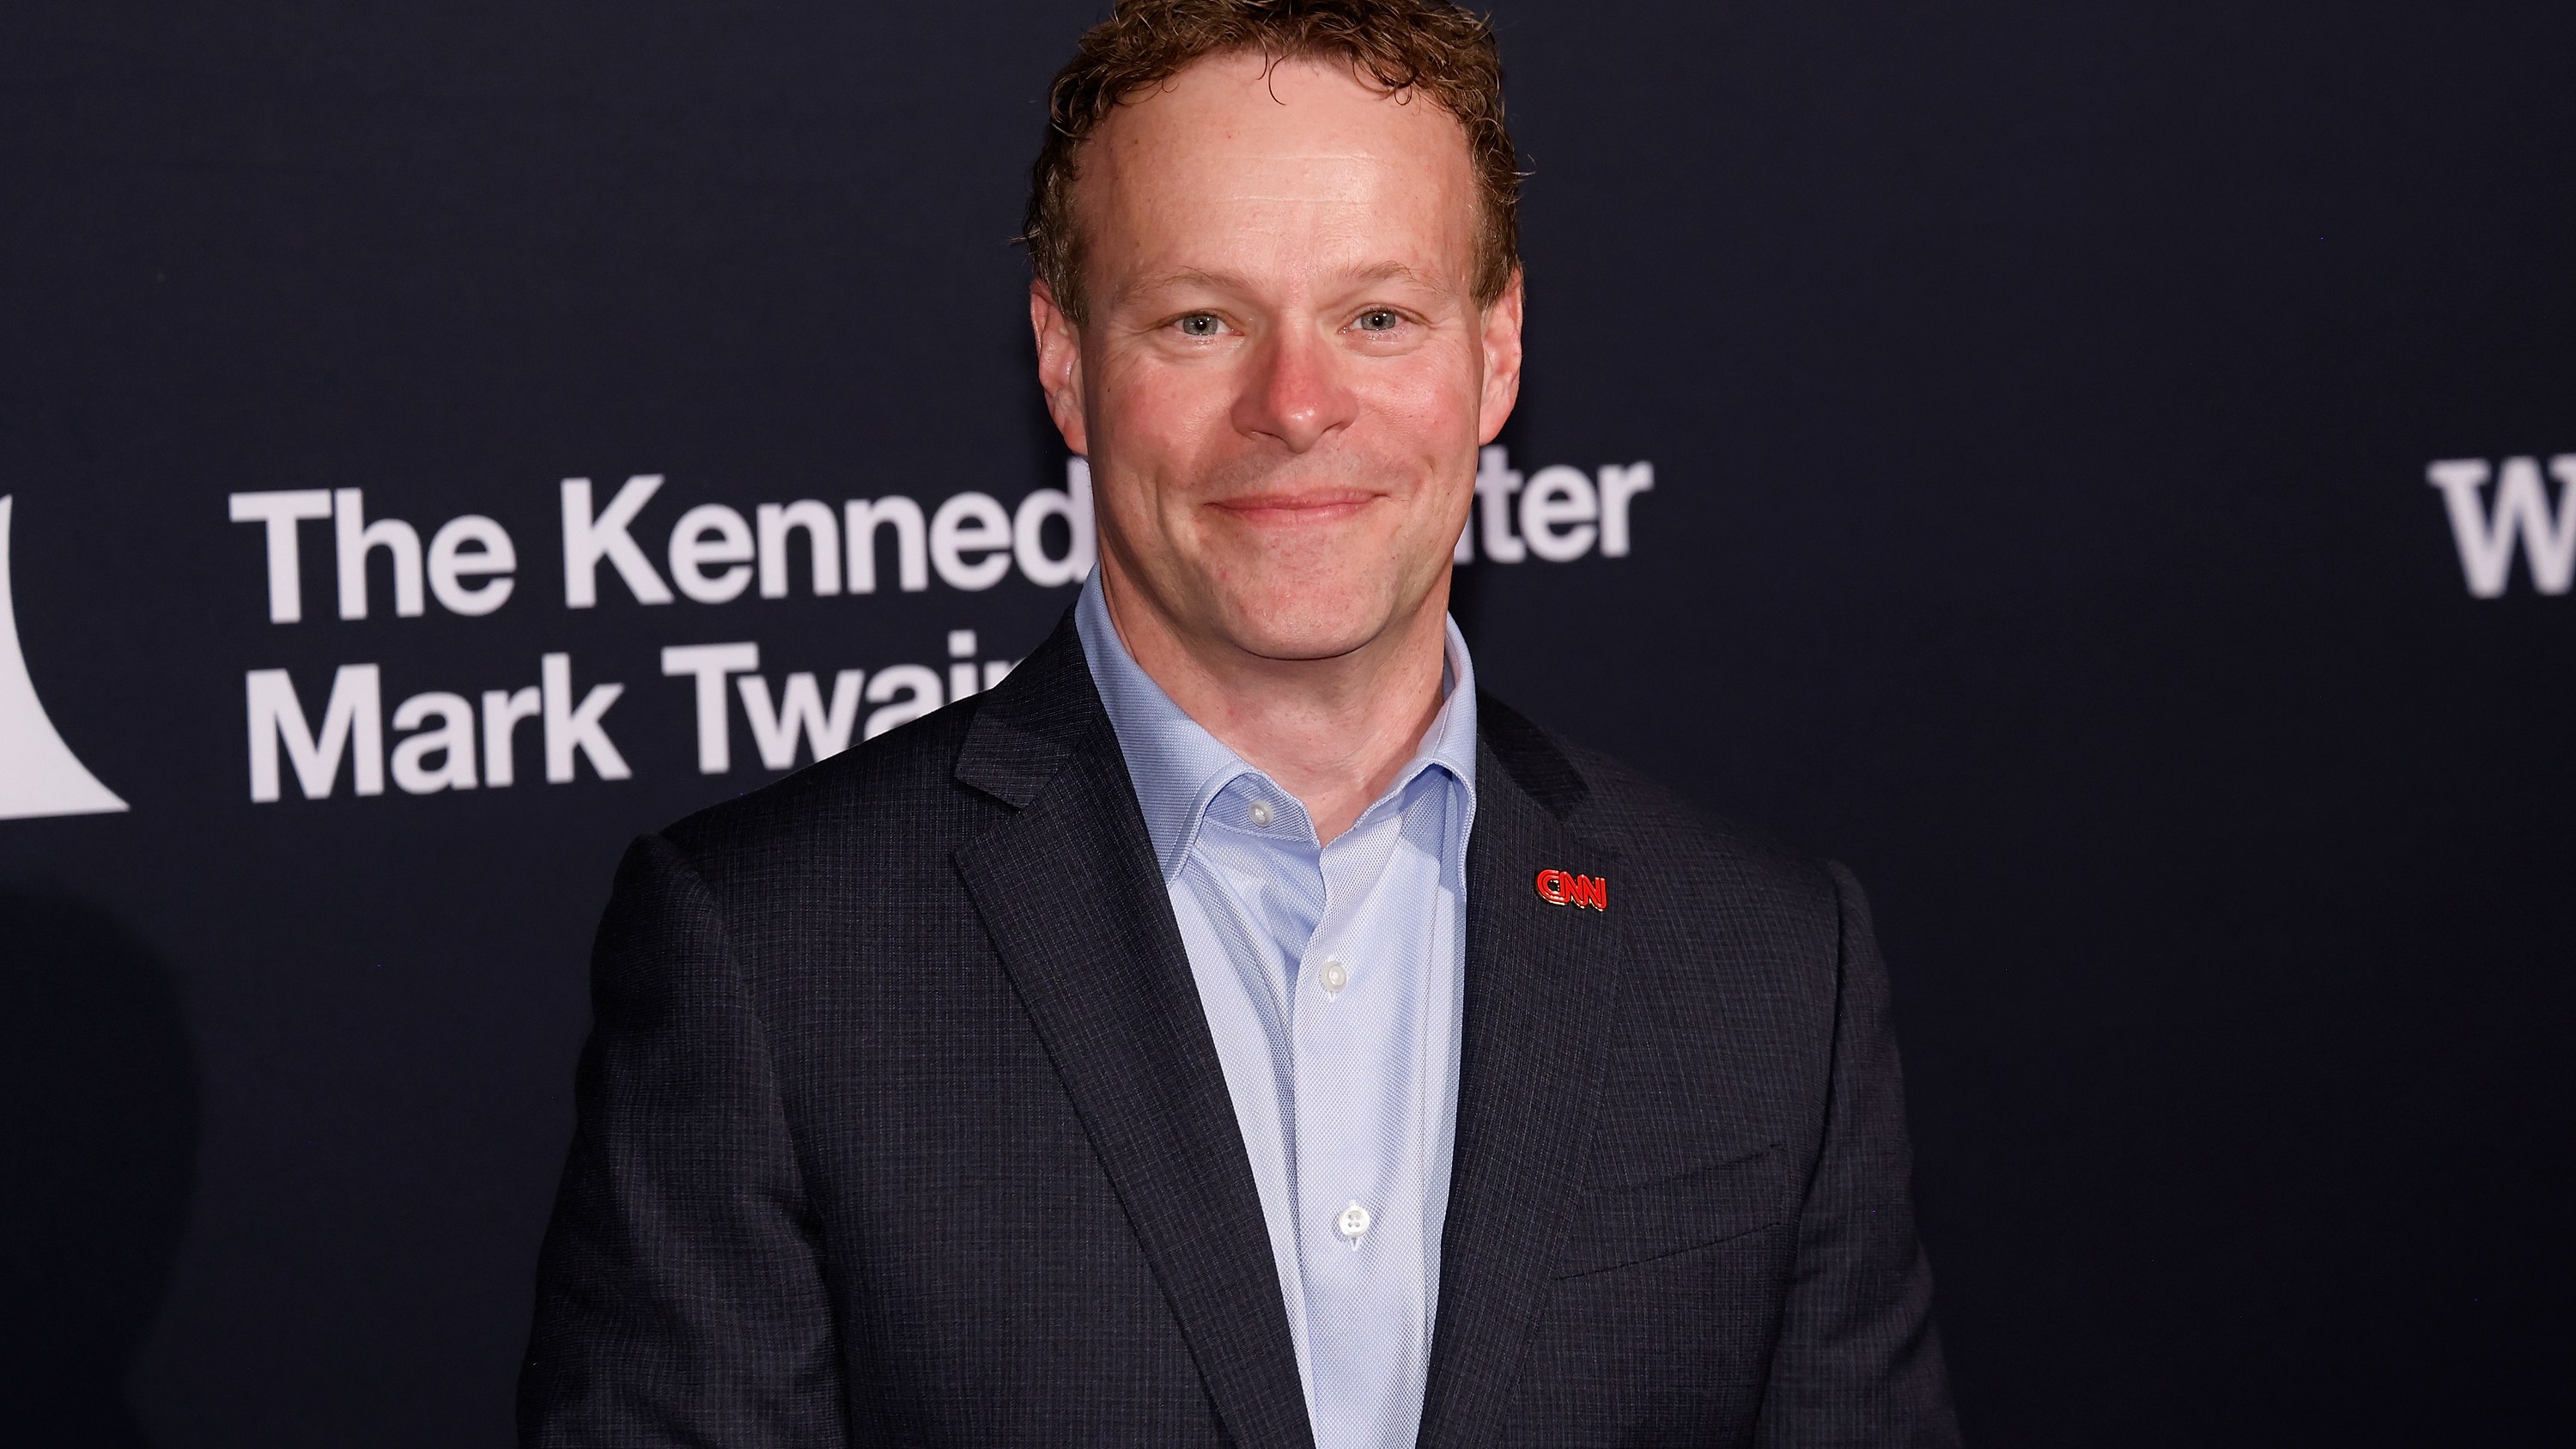 WASHINGTON, DC - MARCH 19: Chris Licht attends the 2023 Mark Twain Prize for American Humor presentation at The Kennedy Center on March 19, 2023 in Washington, DC. (Photo by Taylor Hill/WireImage)